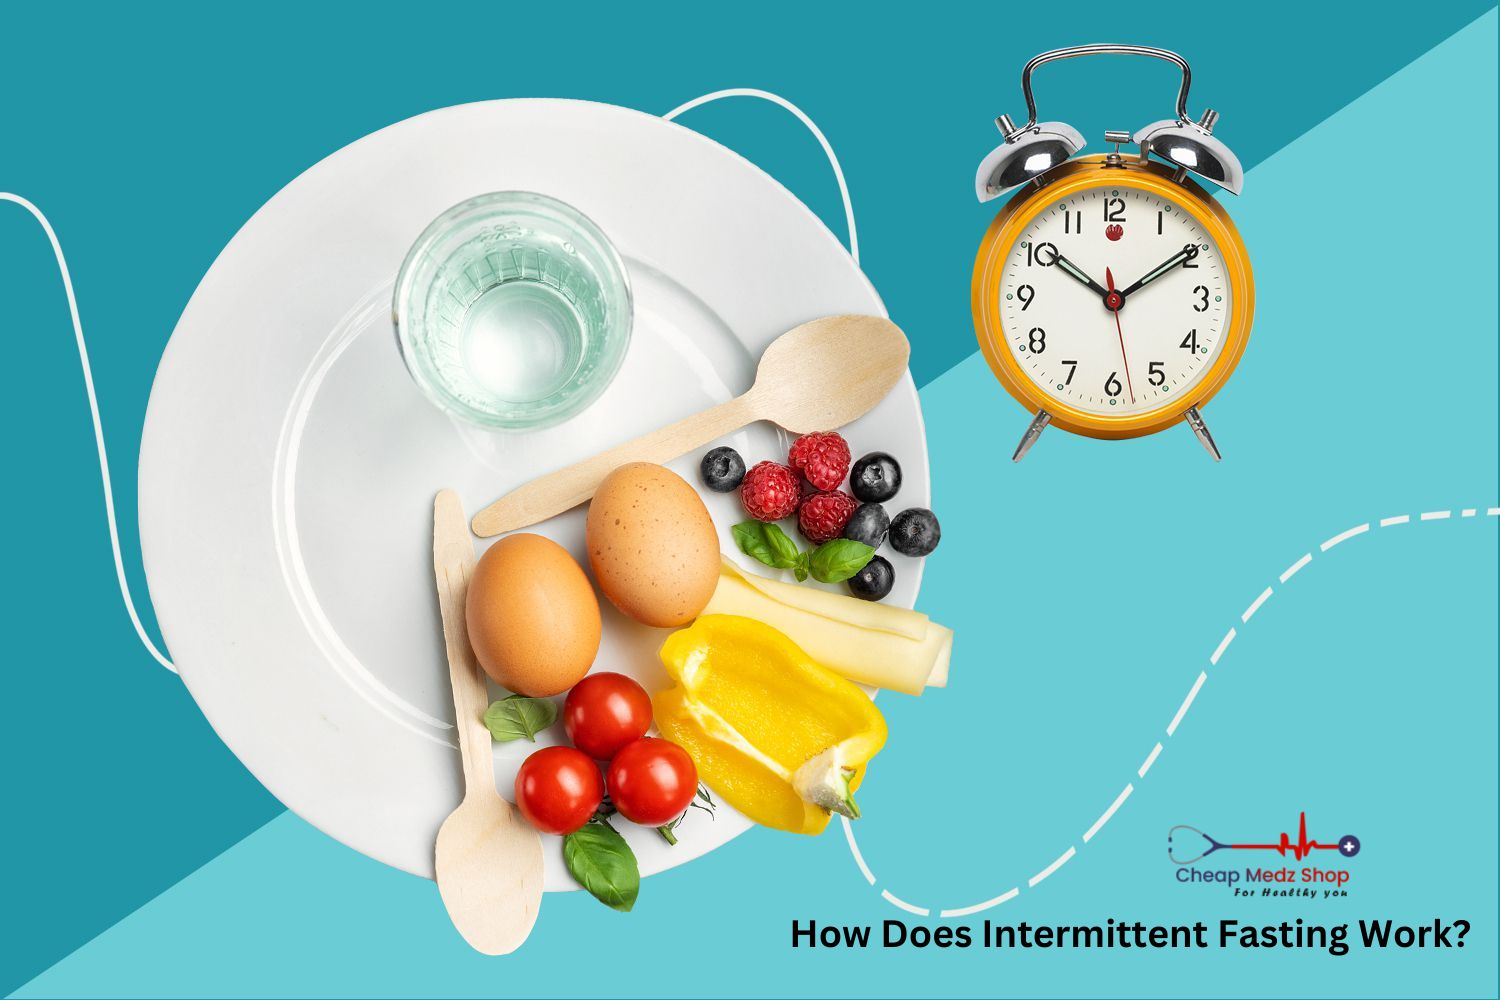 How Does Intermittent Fasting Work?